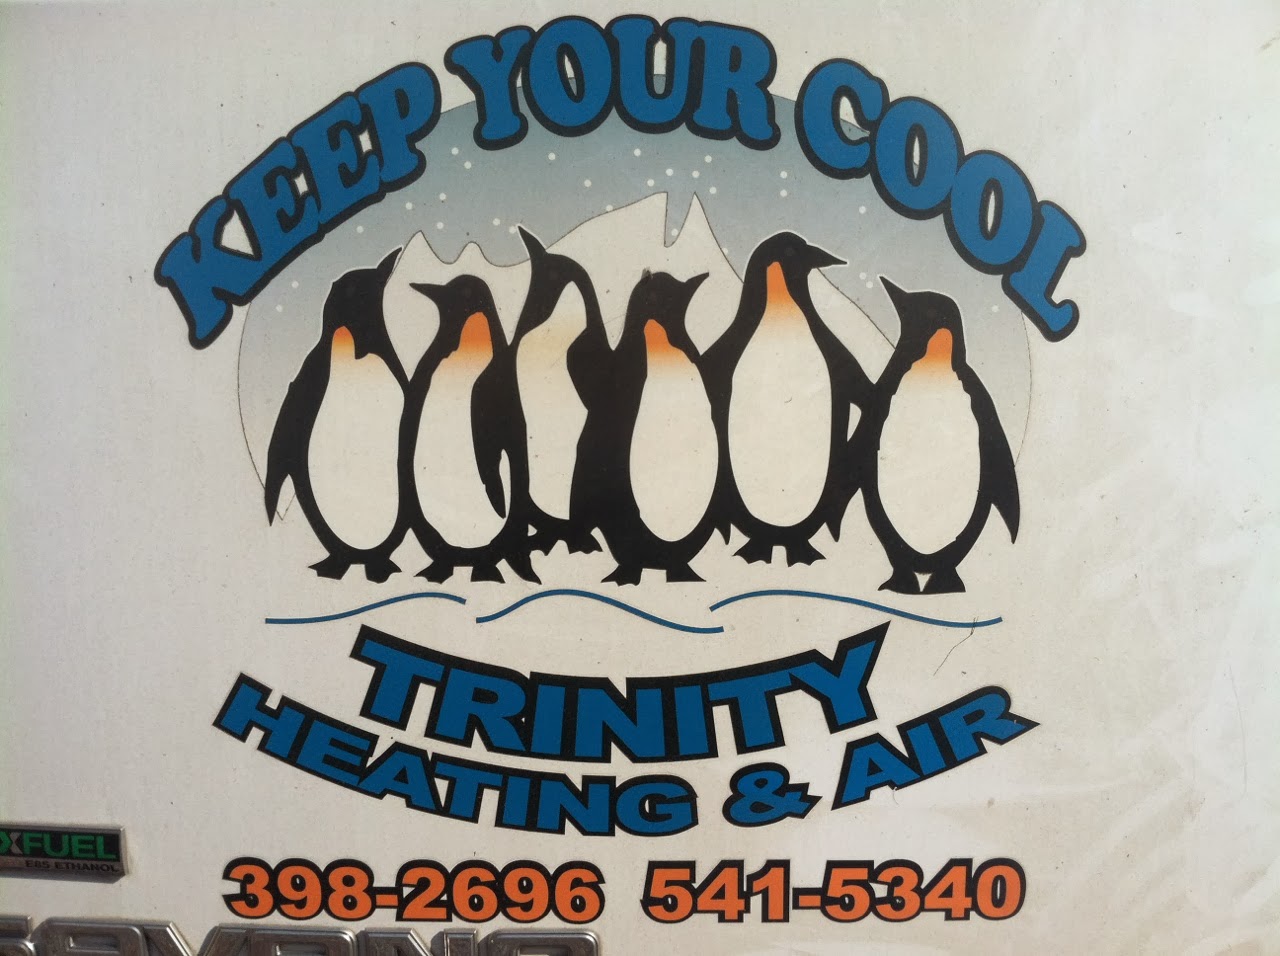 Trinity Heating & Air Conditioning Co Inc